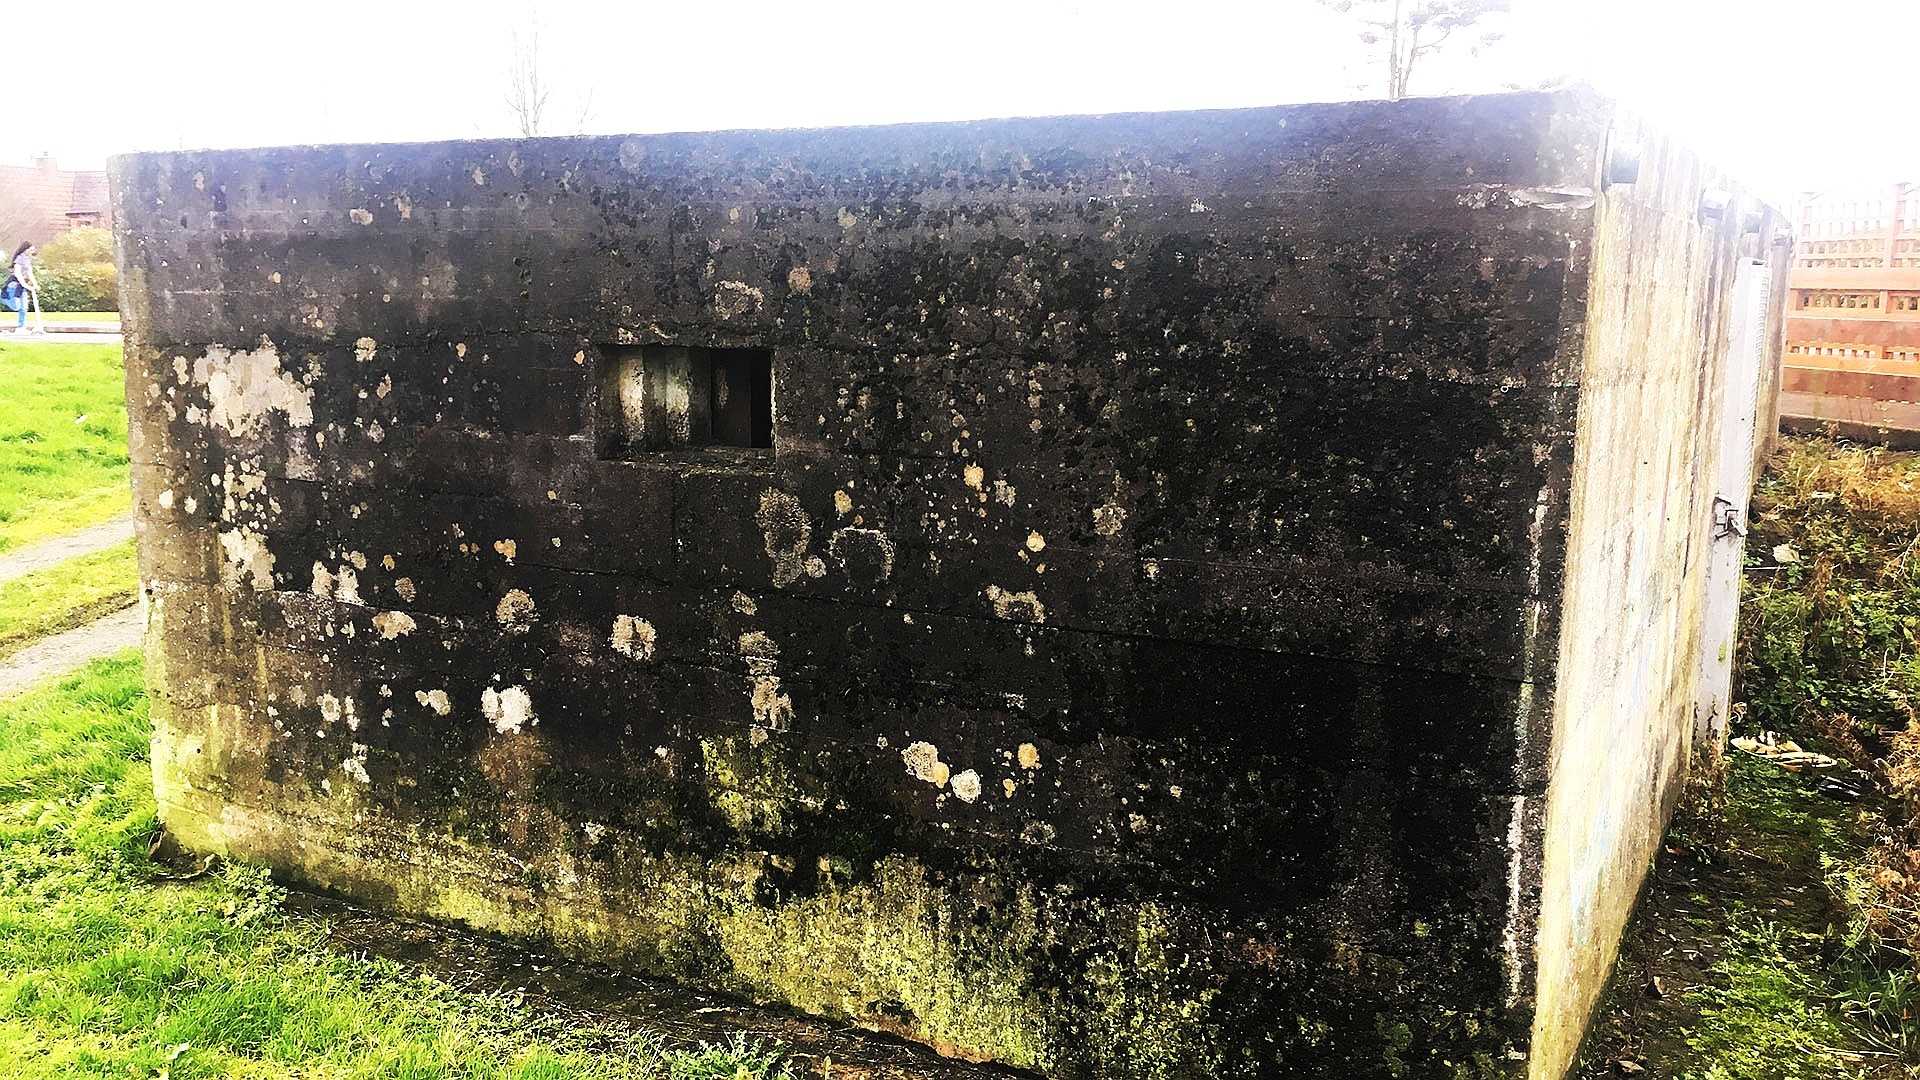 Overview of the preserved Second World War era pillbox at Annagh Meadows, Portadown, Co. Armagh.